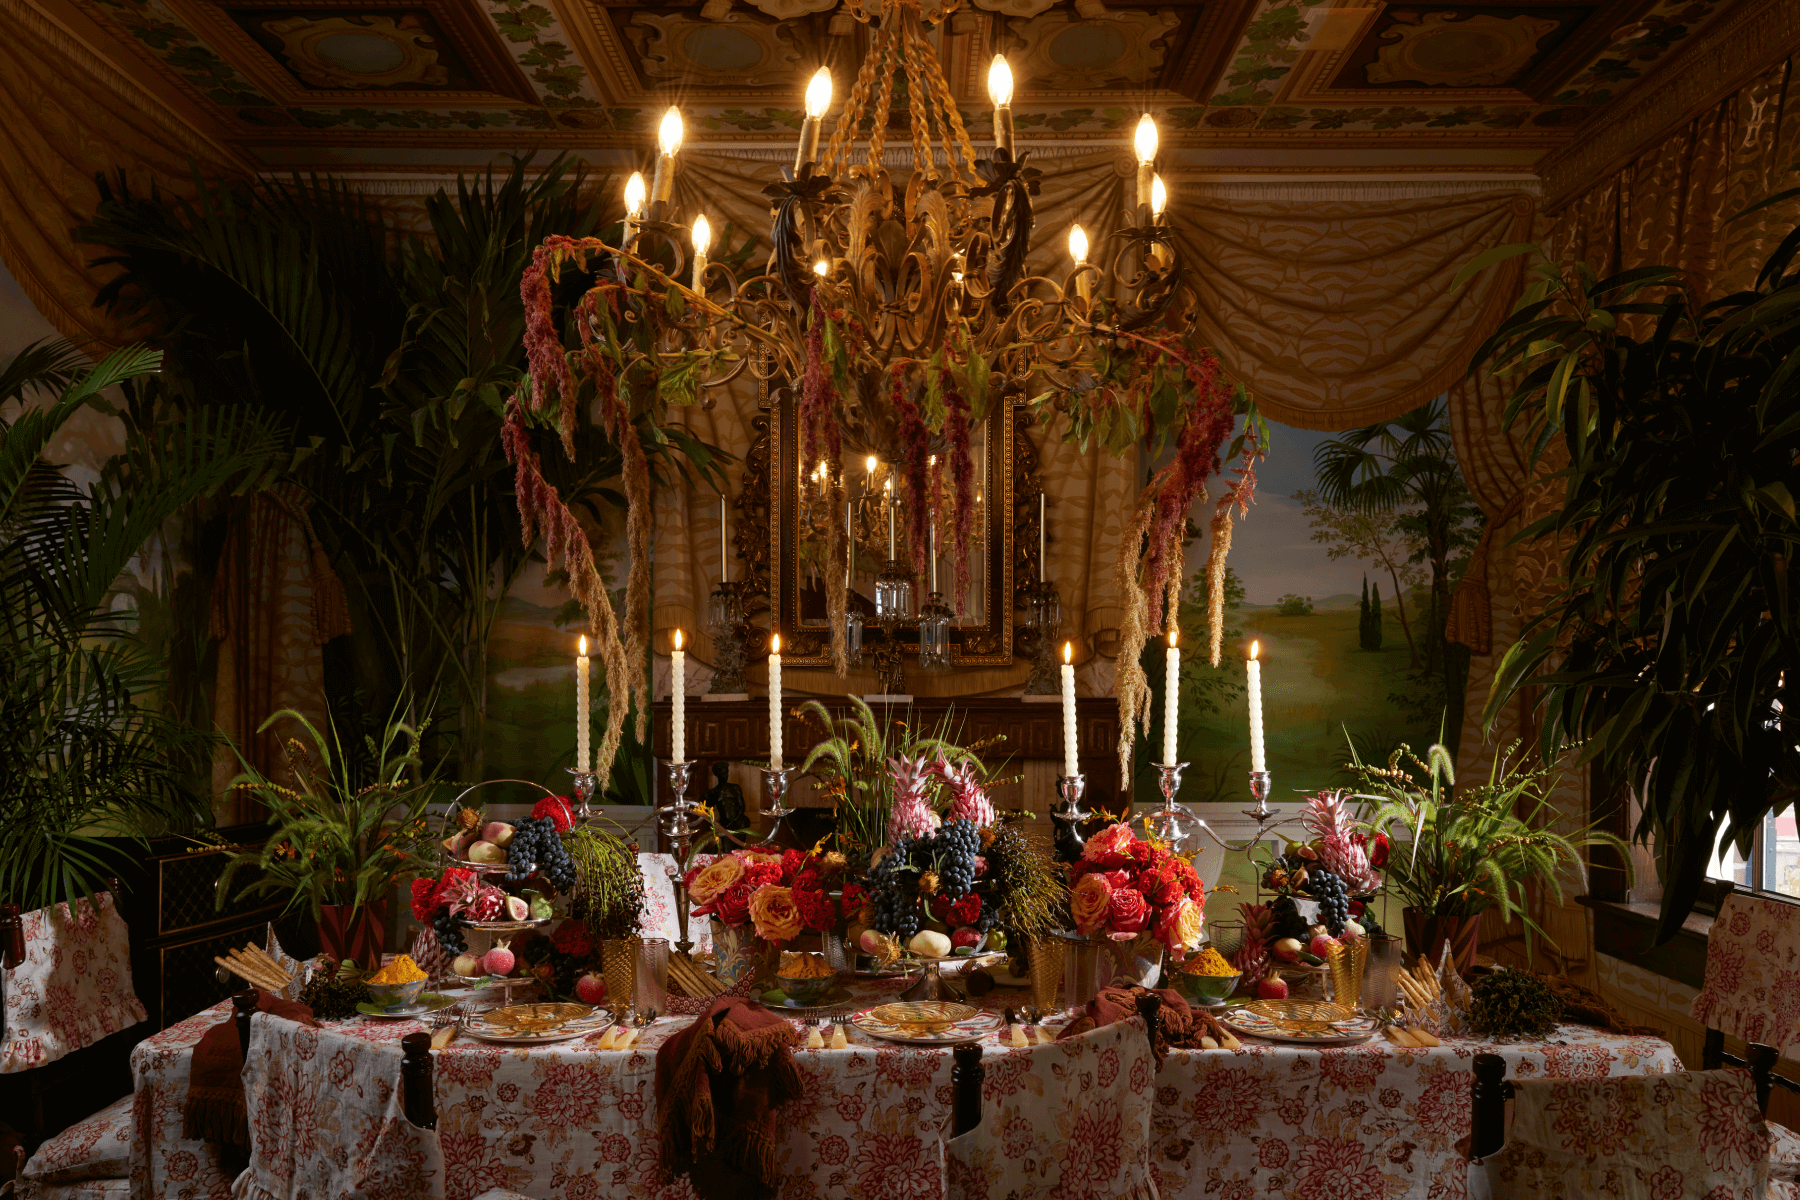 An ornate room with landscape-painted walls, gold drapes, and a large chandelier with floral arrangement is set for a meal with tall taper candles, pink toil chair covers, and lots of colorful flowers.